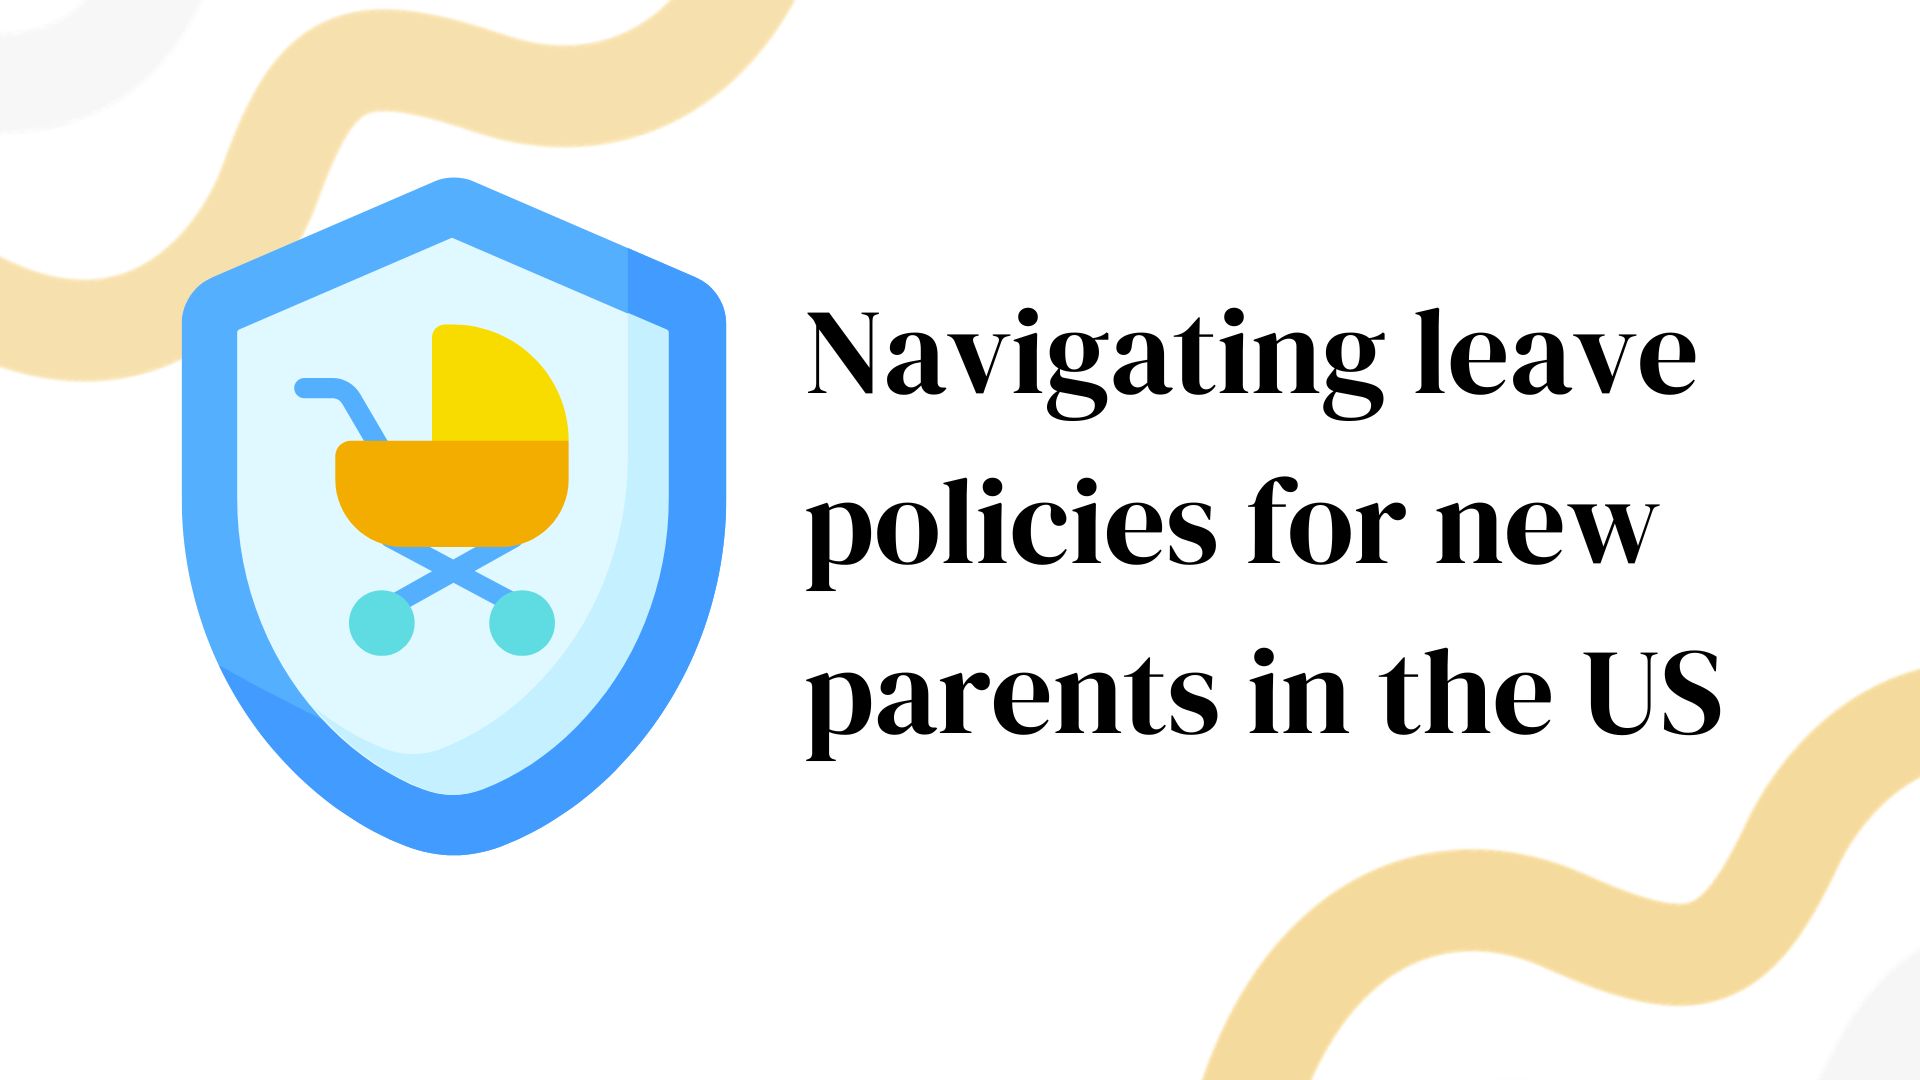 Navigating leave policies for new parents